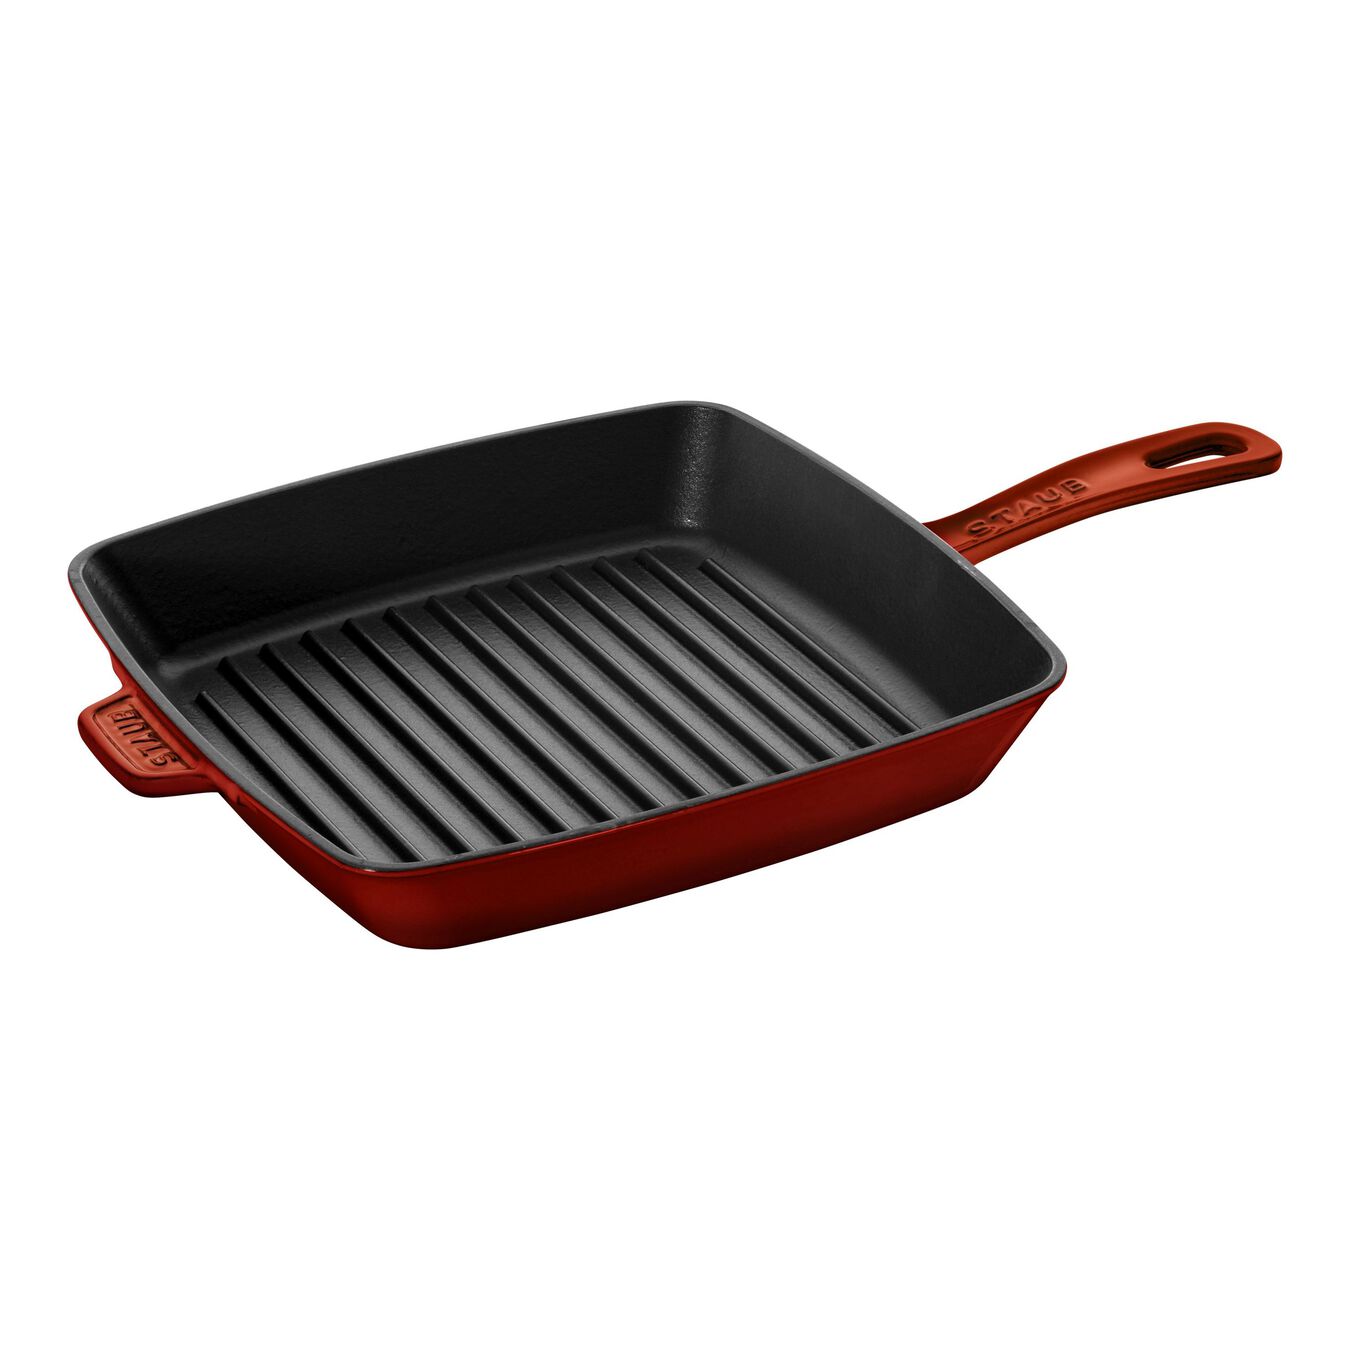 30 cm cast iron square American grill, grenadine-red,,large 1